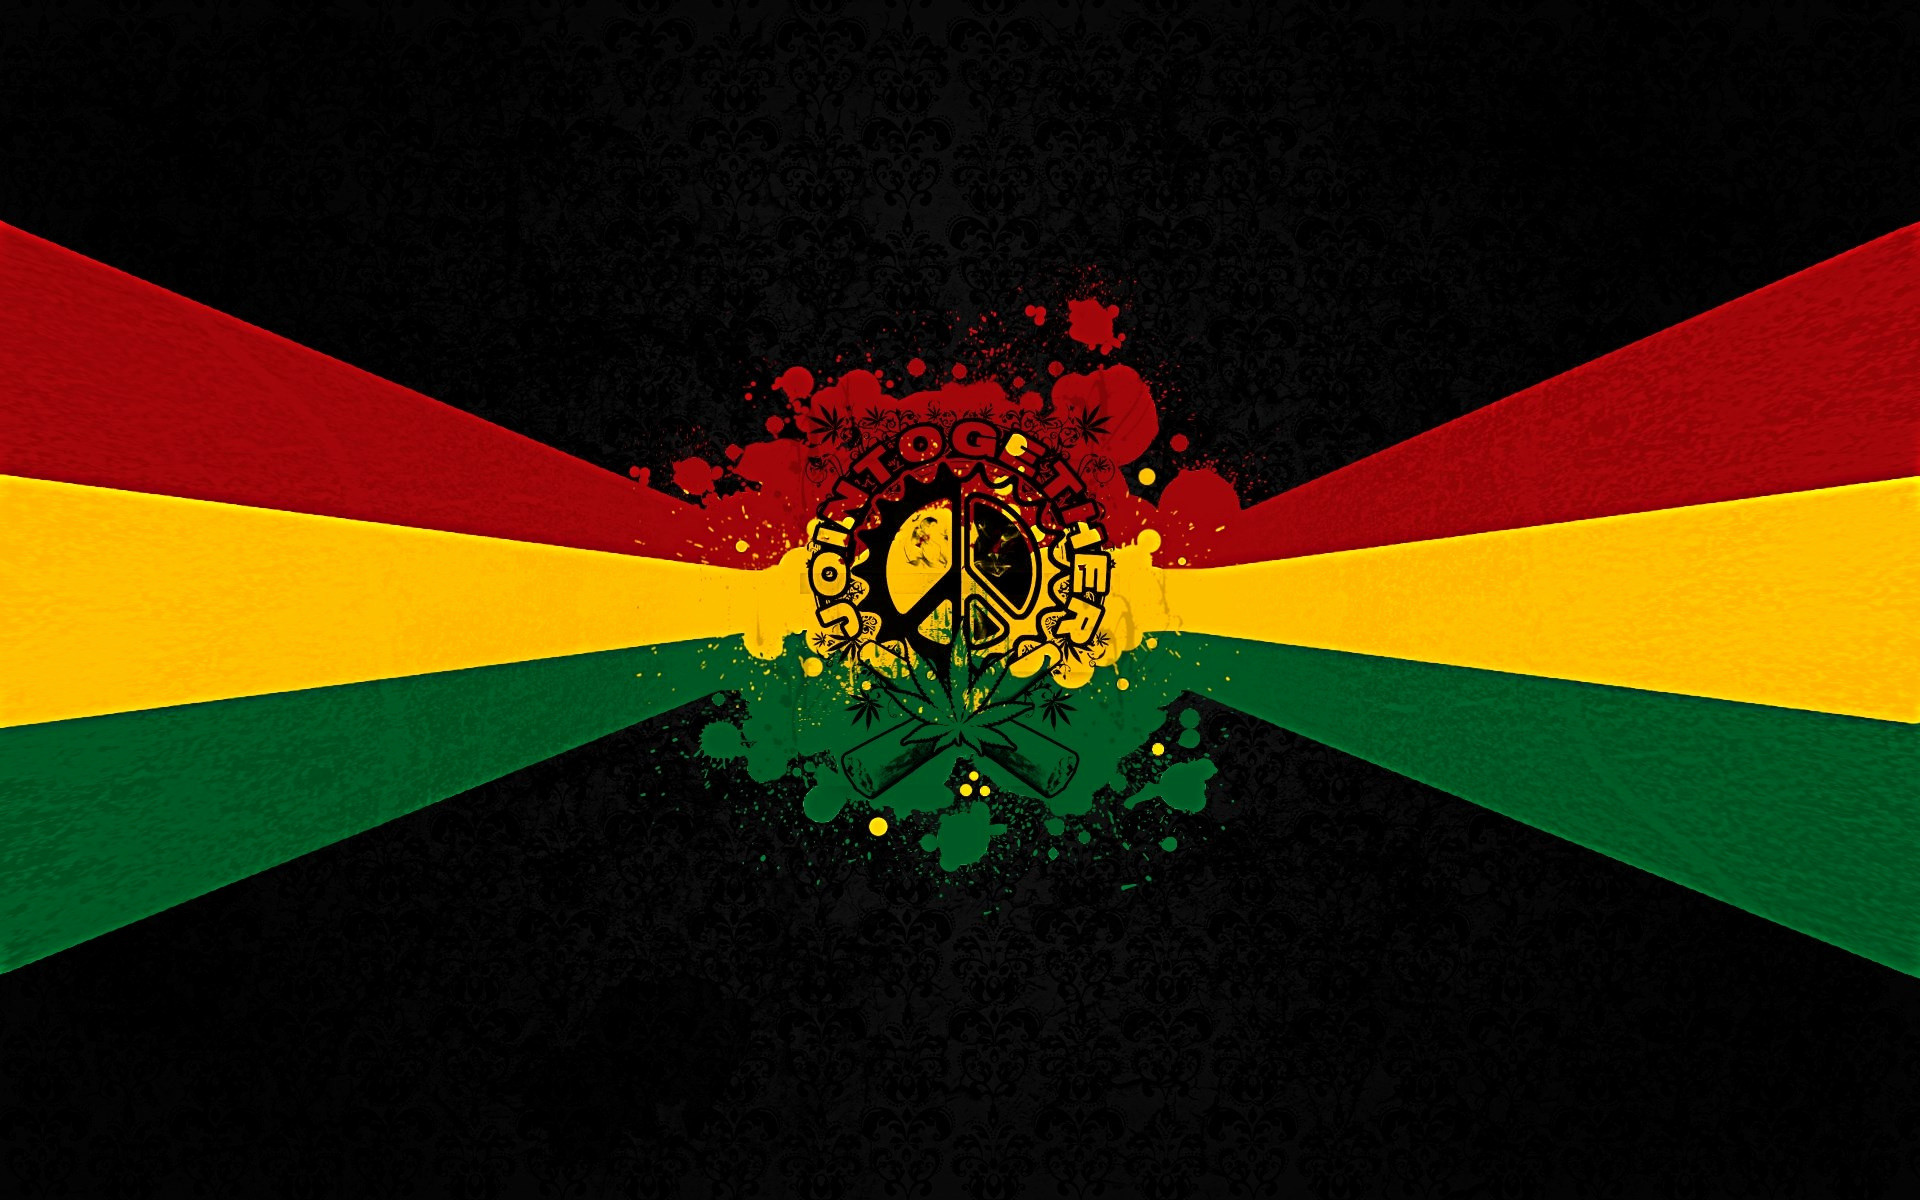 1920x1200 Rasta wallpapers Gallery| Beautiful and Interesting  Images,Vectors,Coloring,Cliparts |Free Hd wallpapers